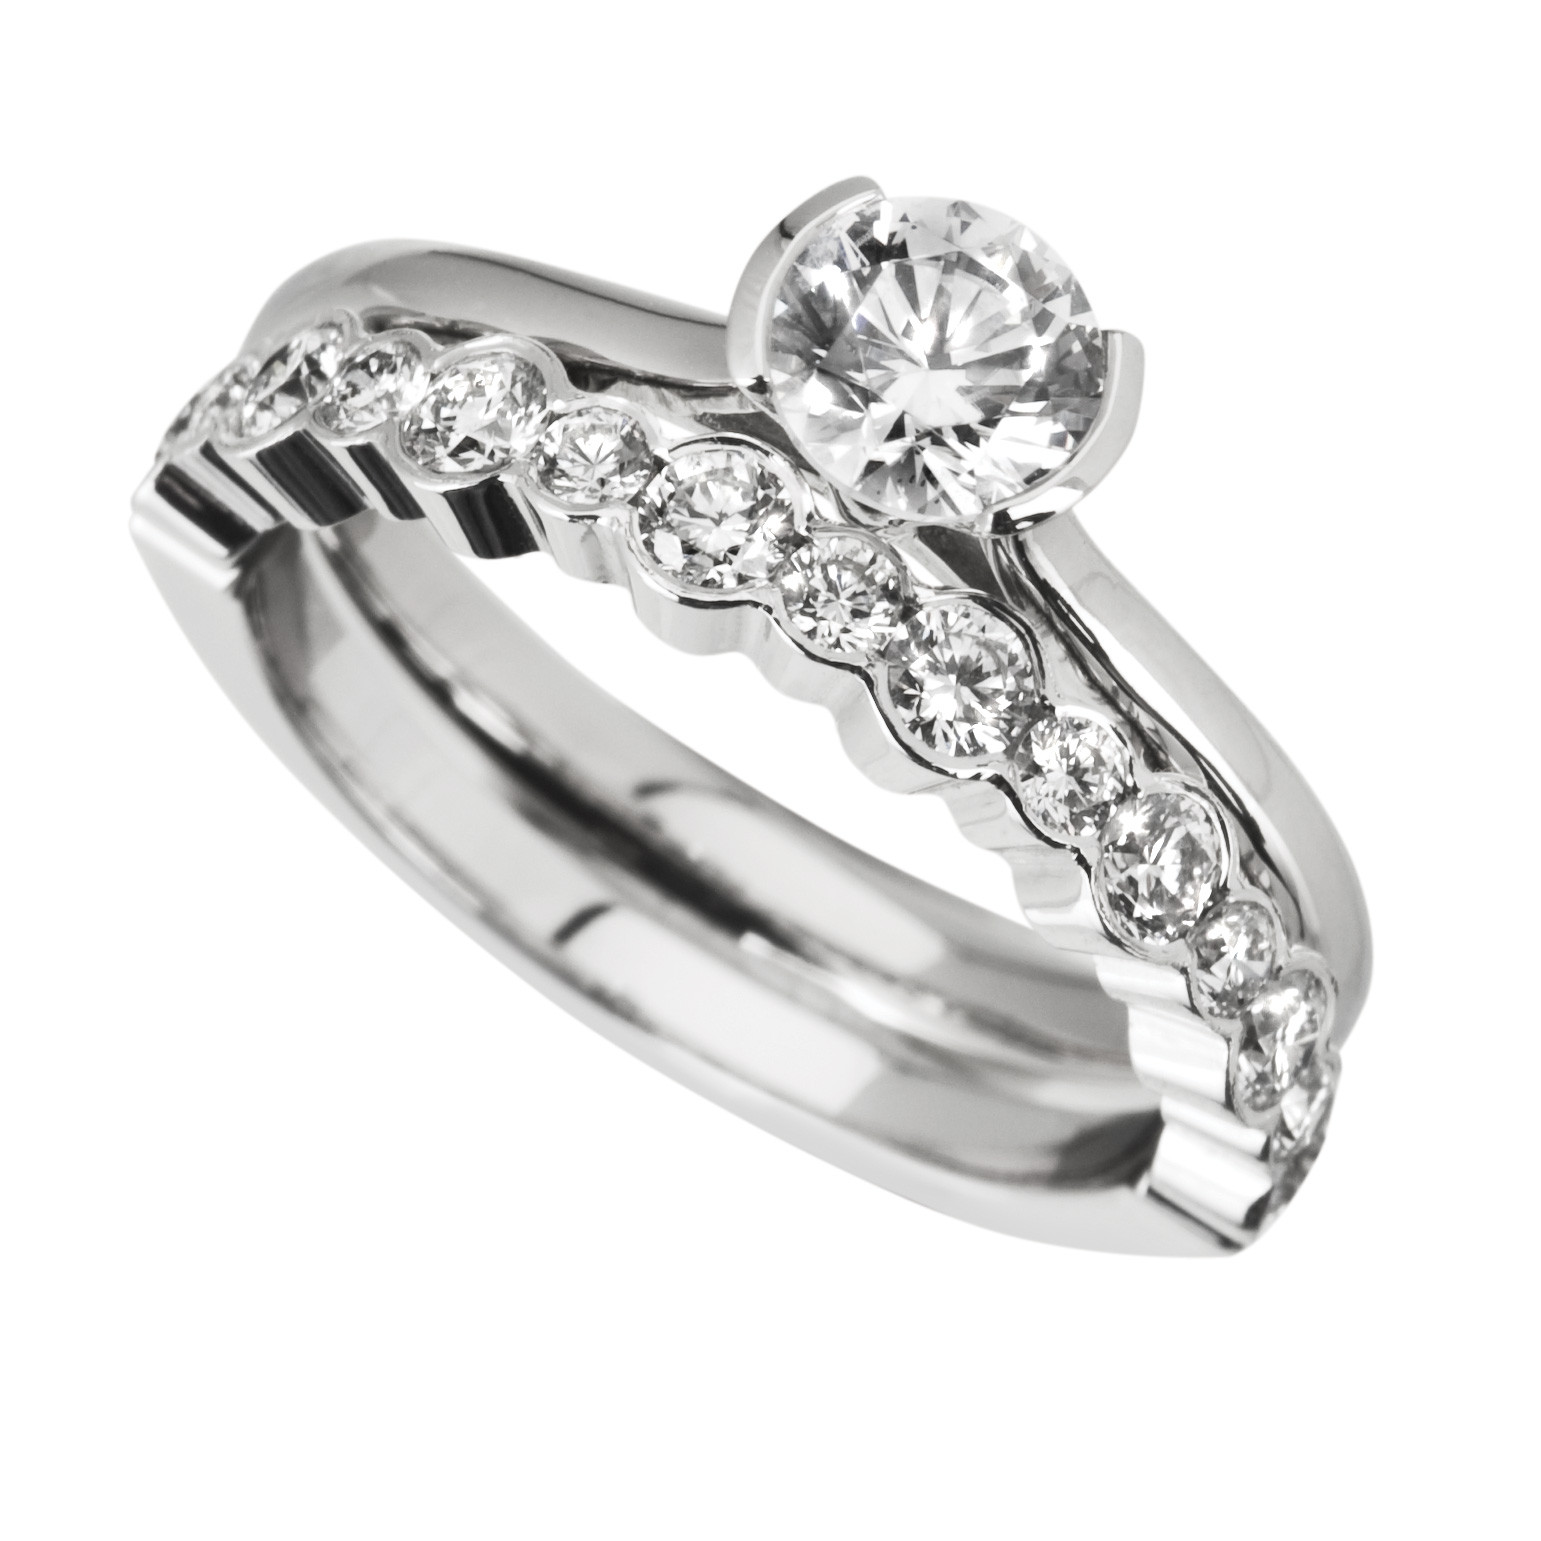 Engagement Wedding Rings Sets
 Diamonds and Rings the line Jeweller Launches a New